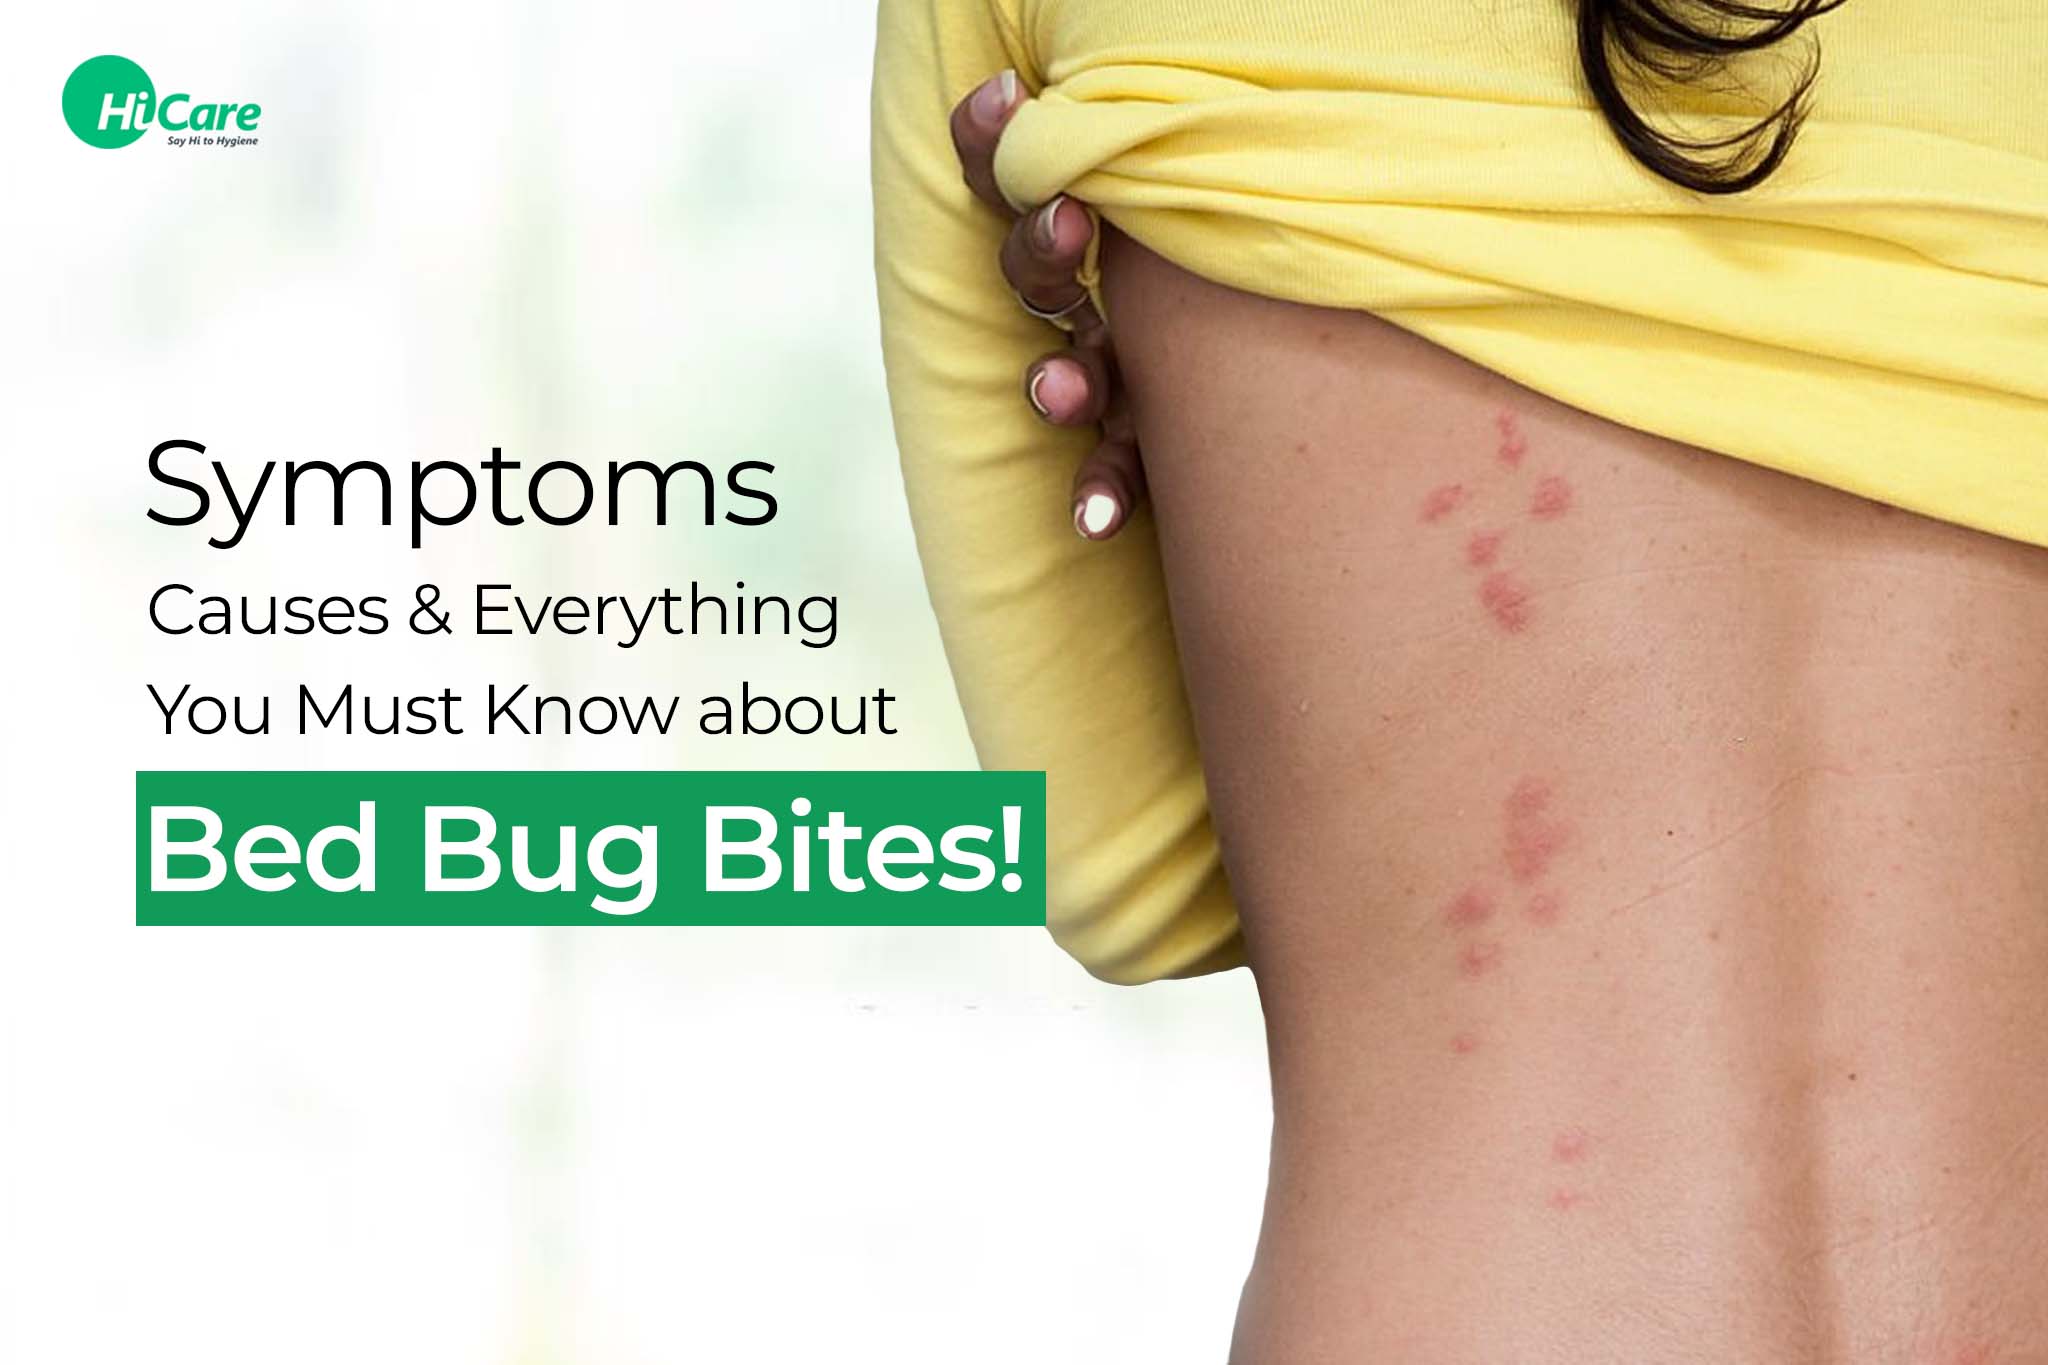 symptoms, causes & everything you must know about bed bug bites